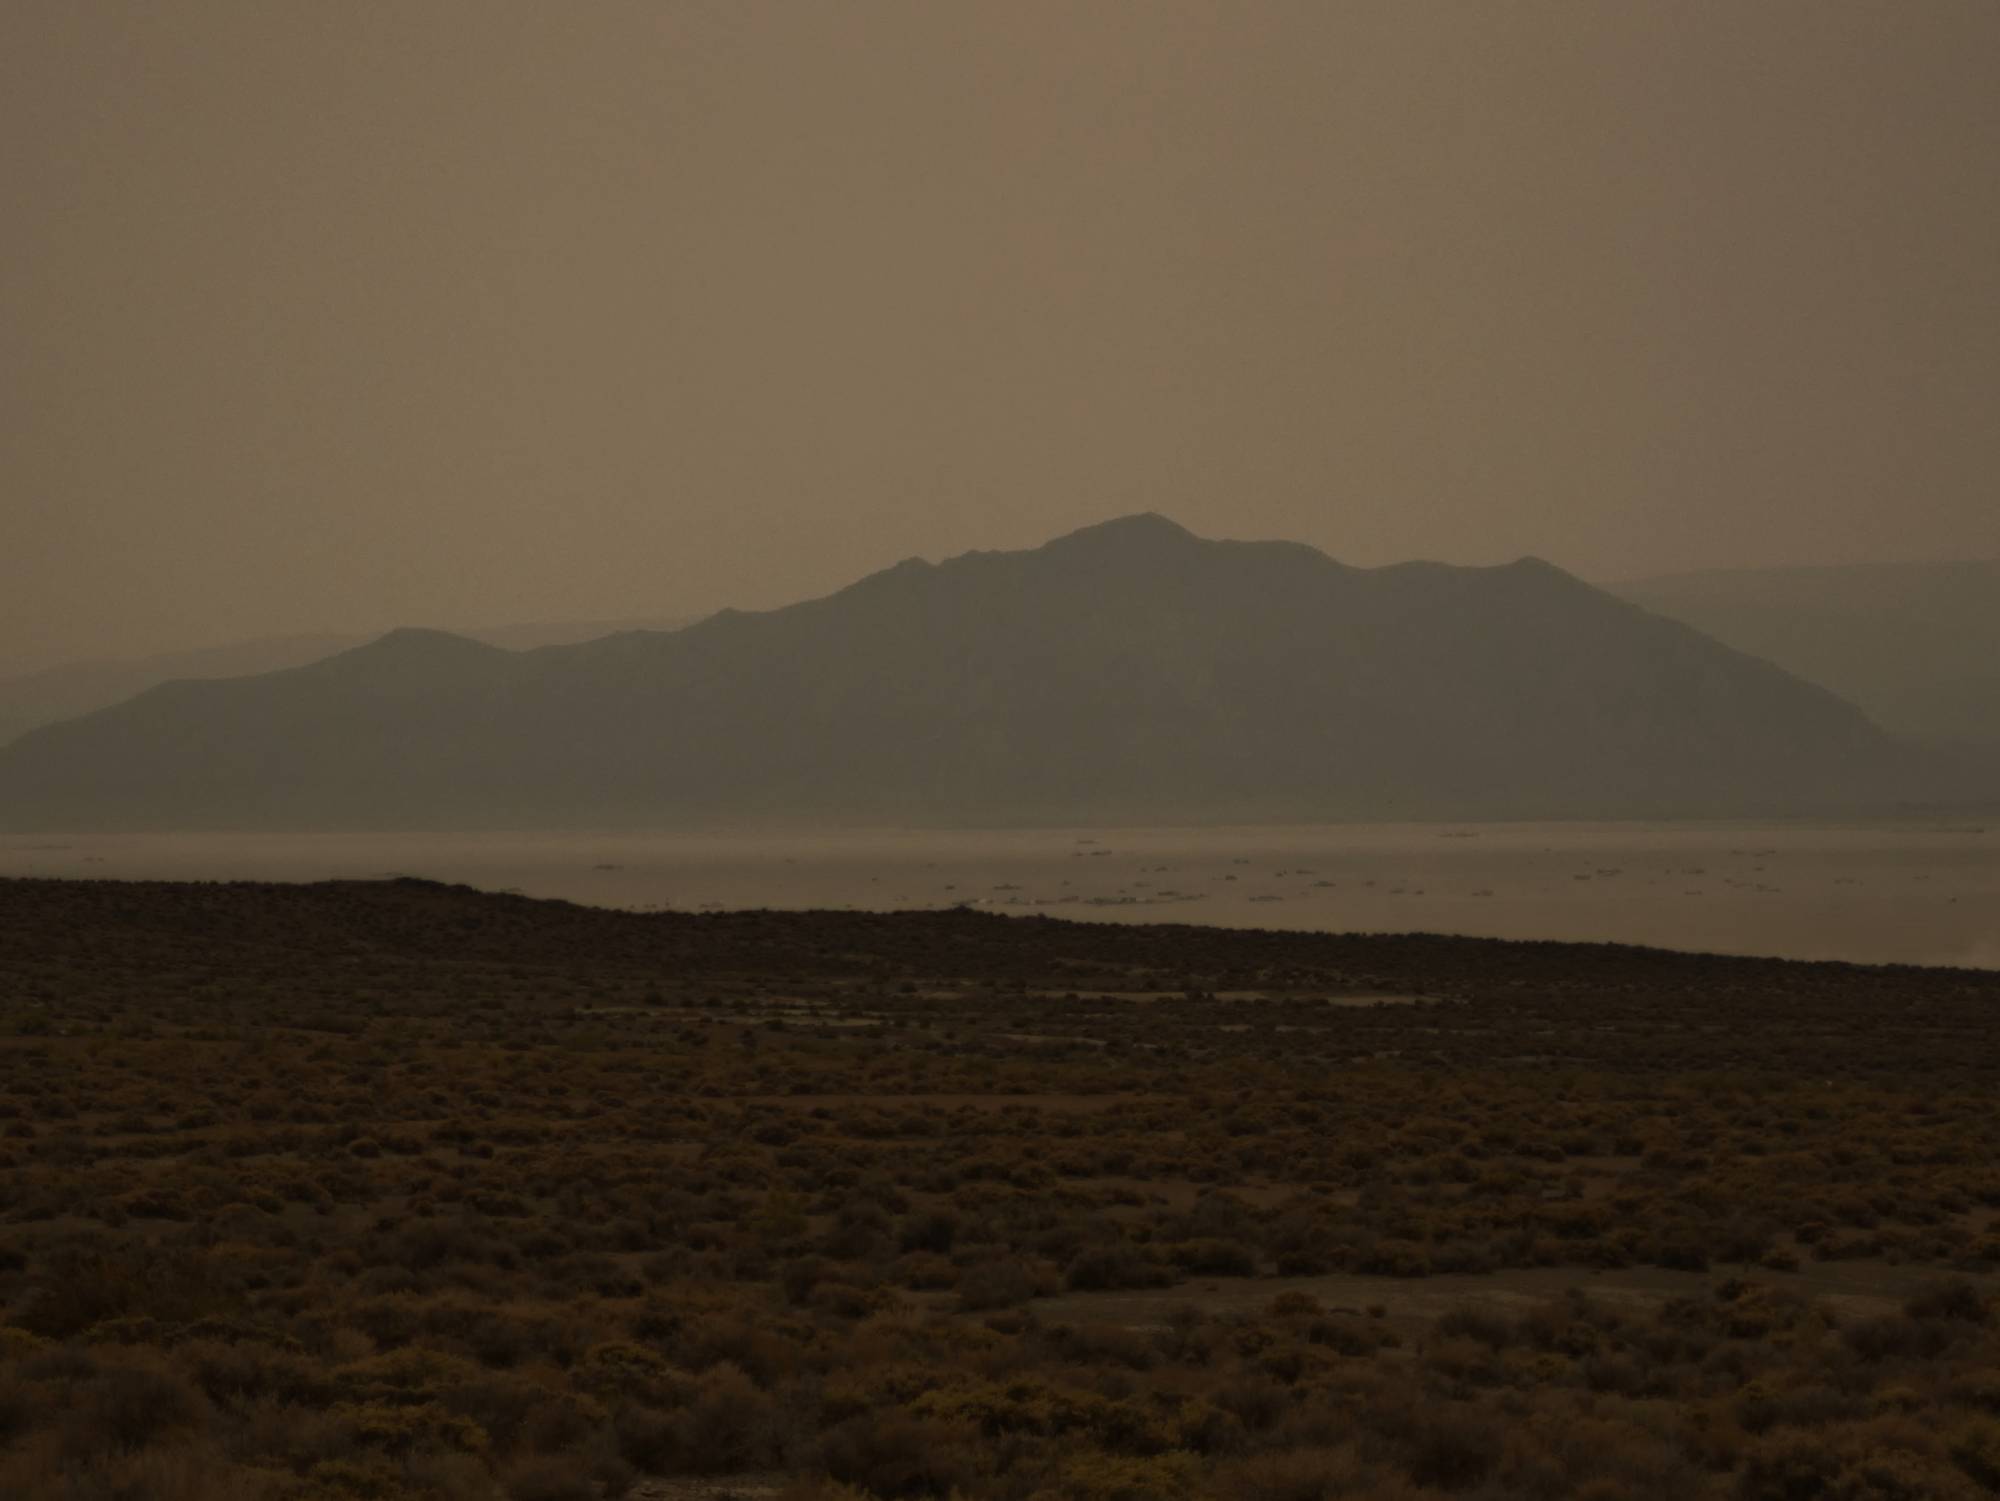 Heavy smoke from the forest fires in California has settled on Black Rock City. Old Sawtooth Mountain in the background.